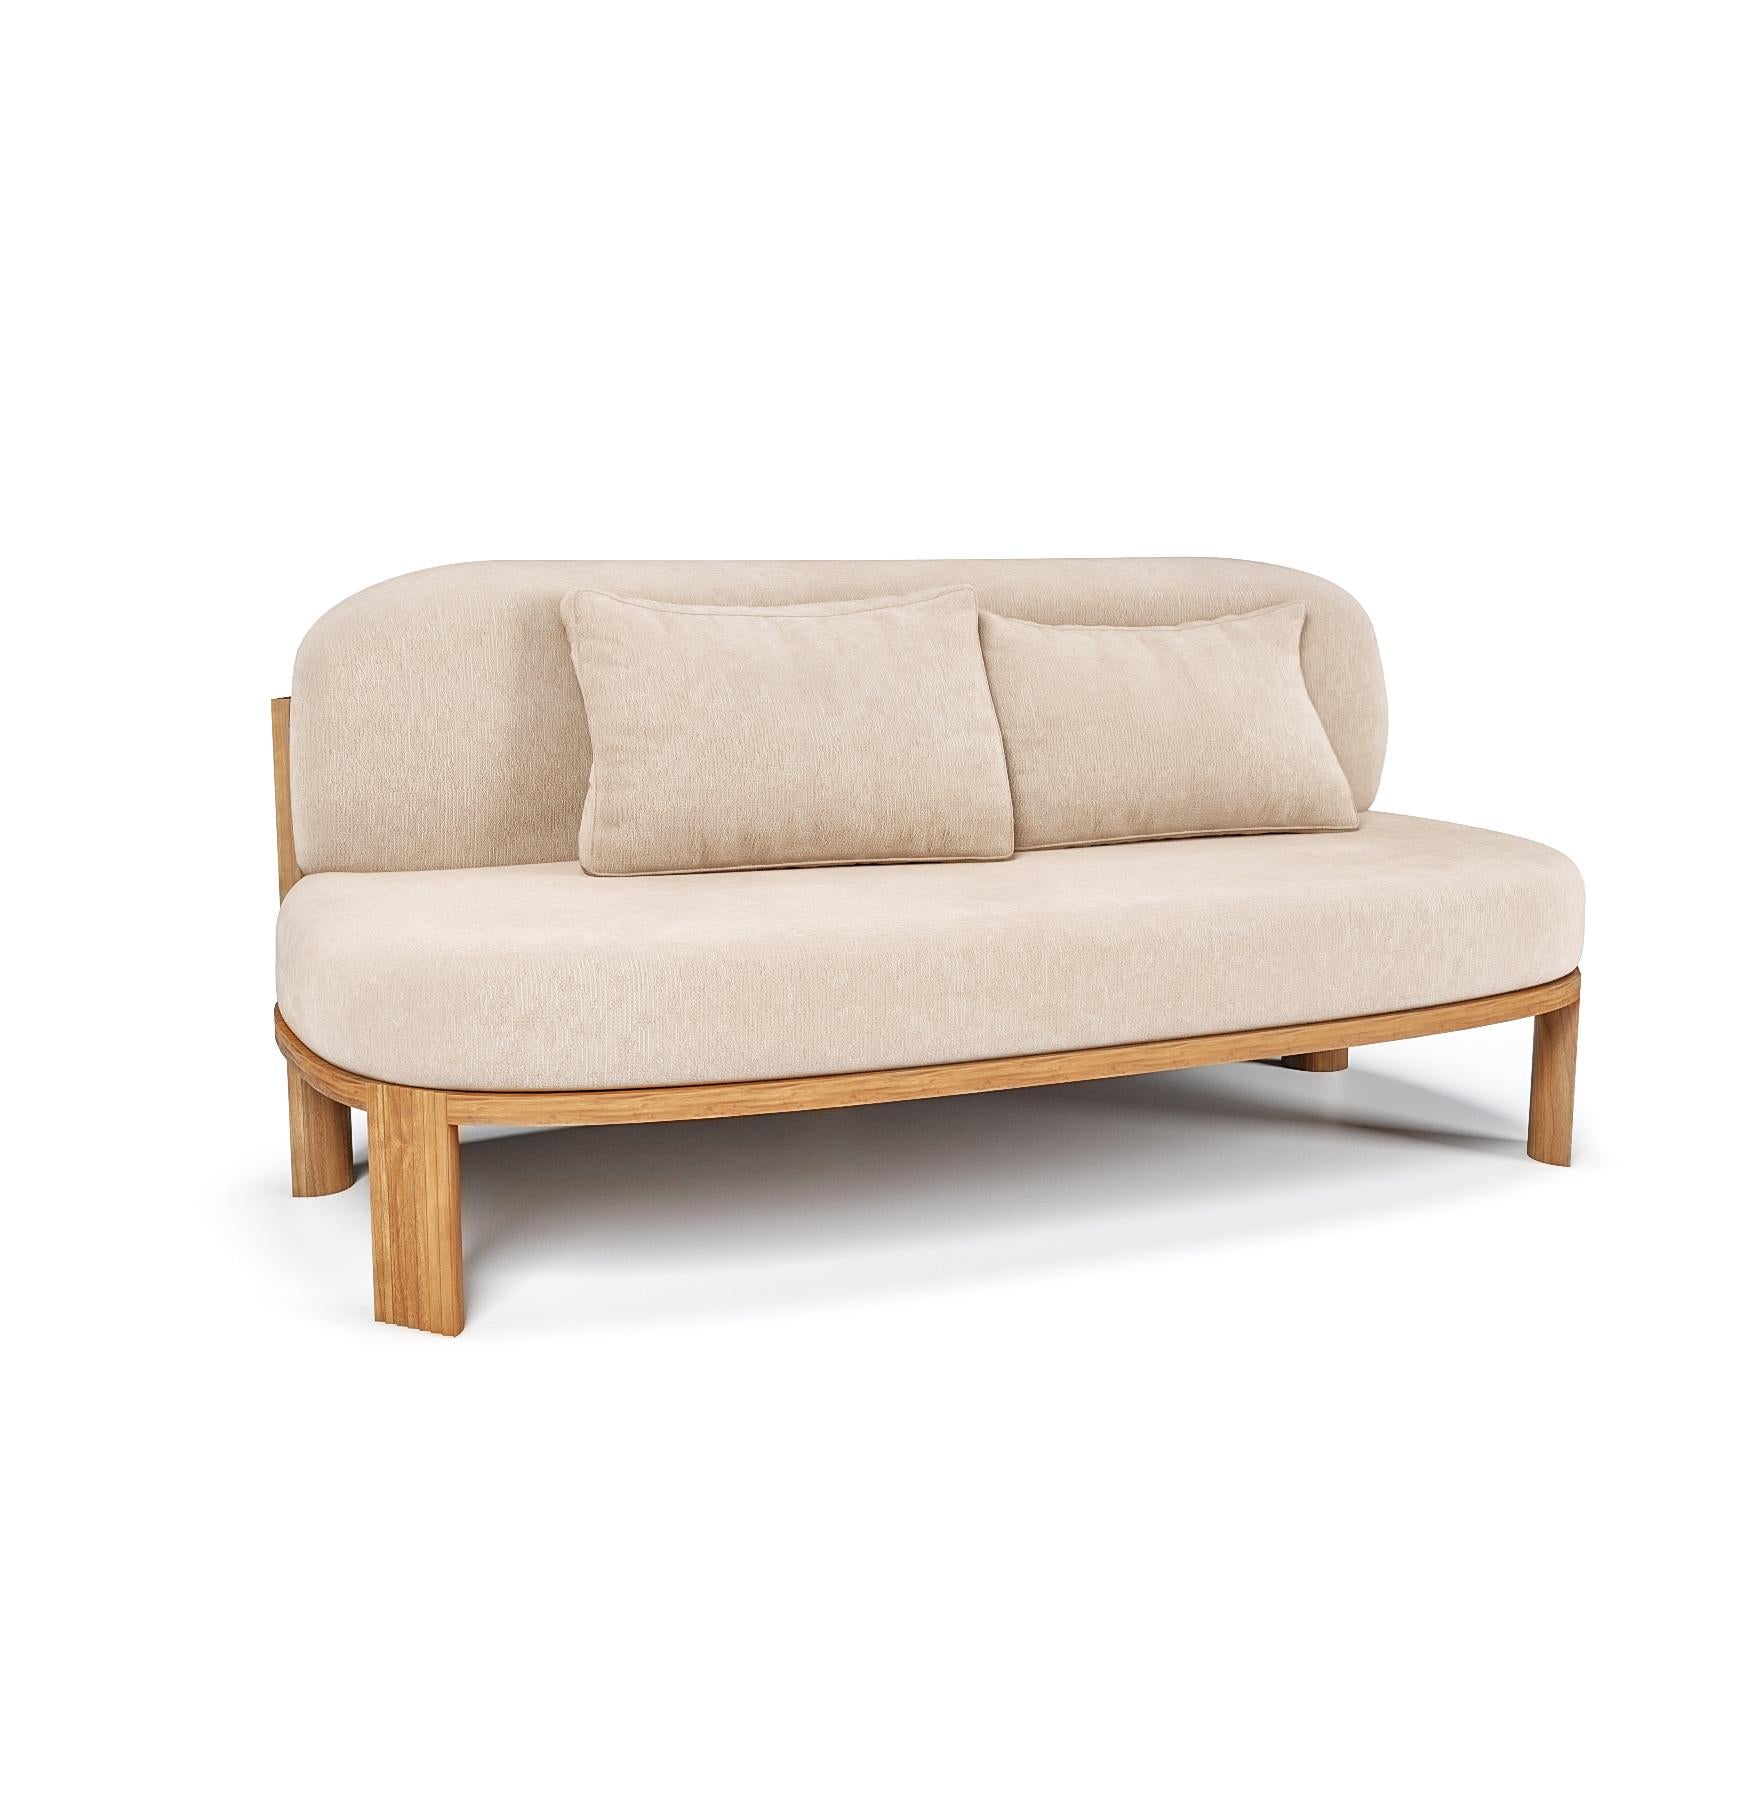 111 Sofa with light brown wooden oak by Federico Peri for Collector Studio.

DIMENSIONS
W 140 cm  55,1″
D 81 cm  31,9″
H 70 cm  27,5″

PRODUCT FEATURES
Structure in Solid Oak wood.
Upholstered in Collector fabric..

PRODUCT